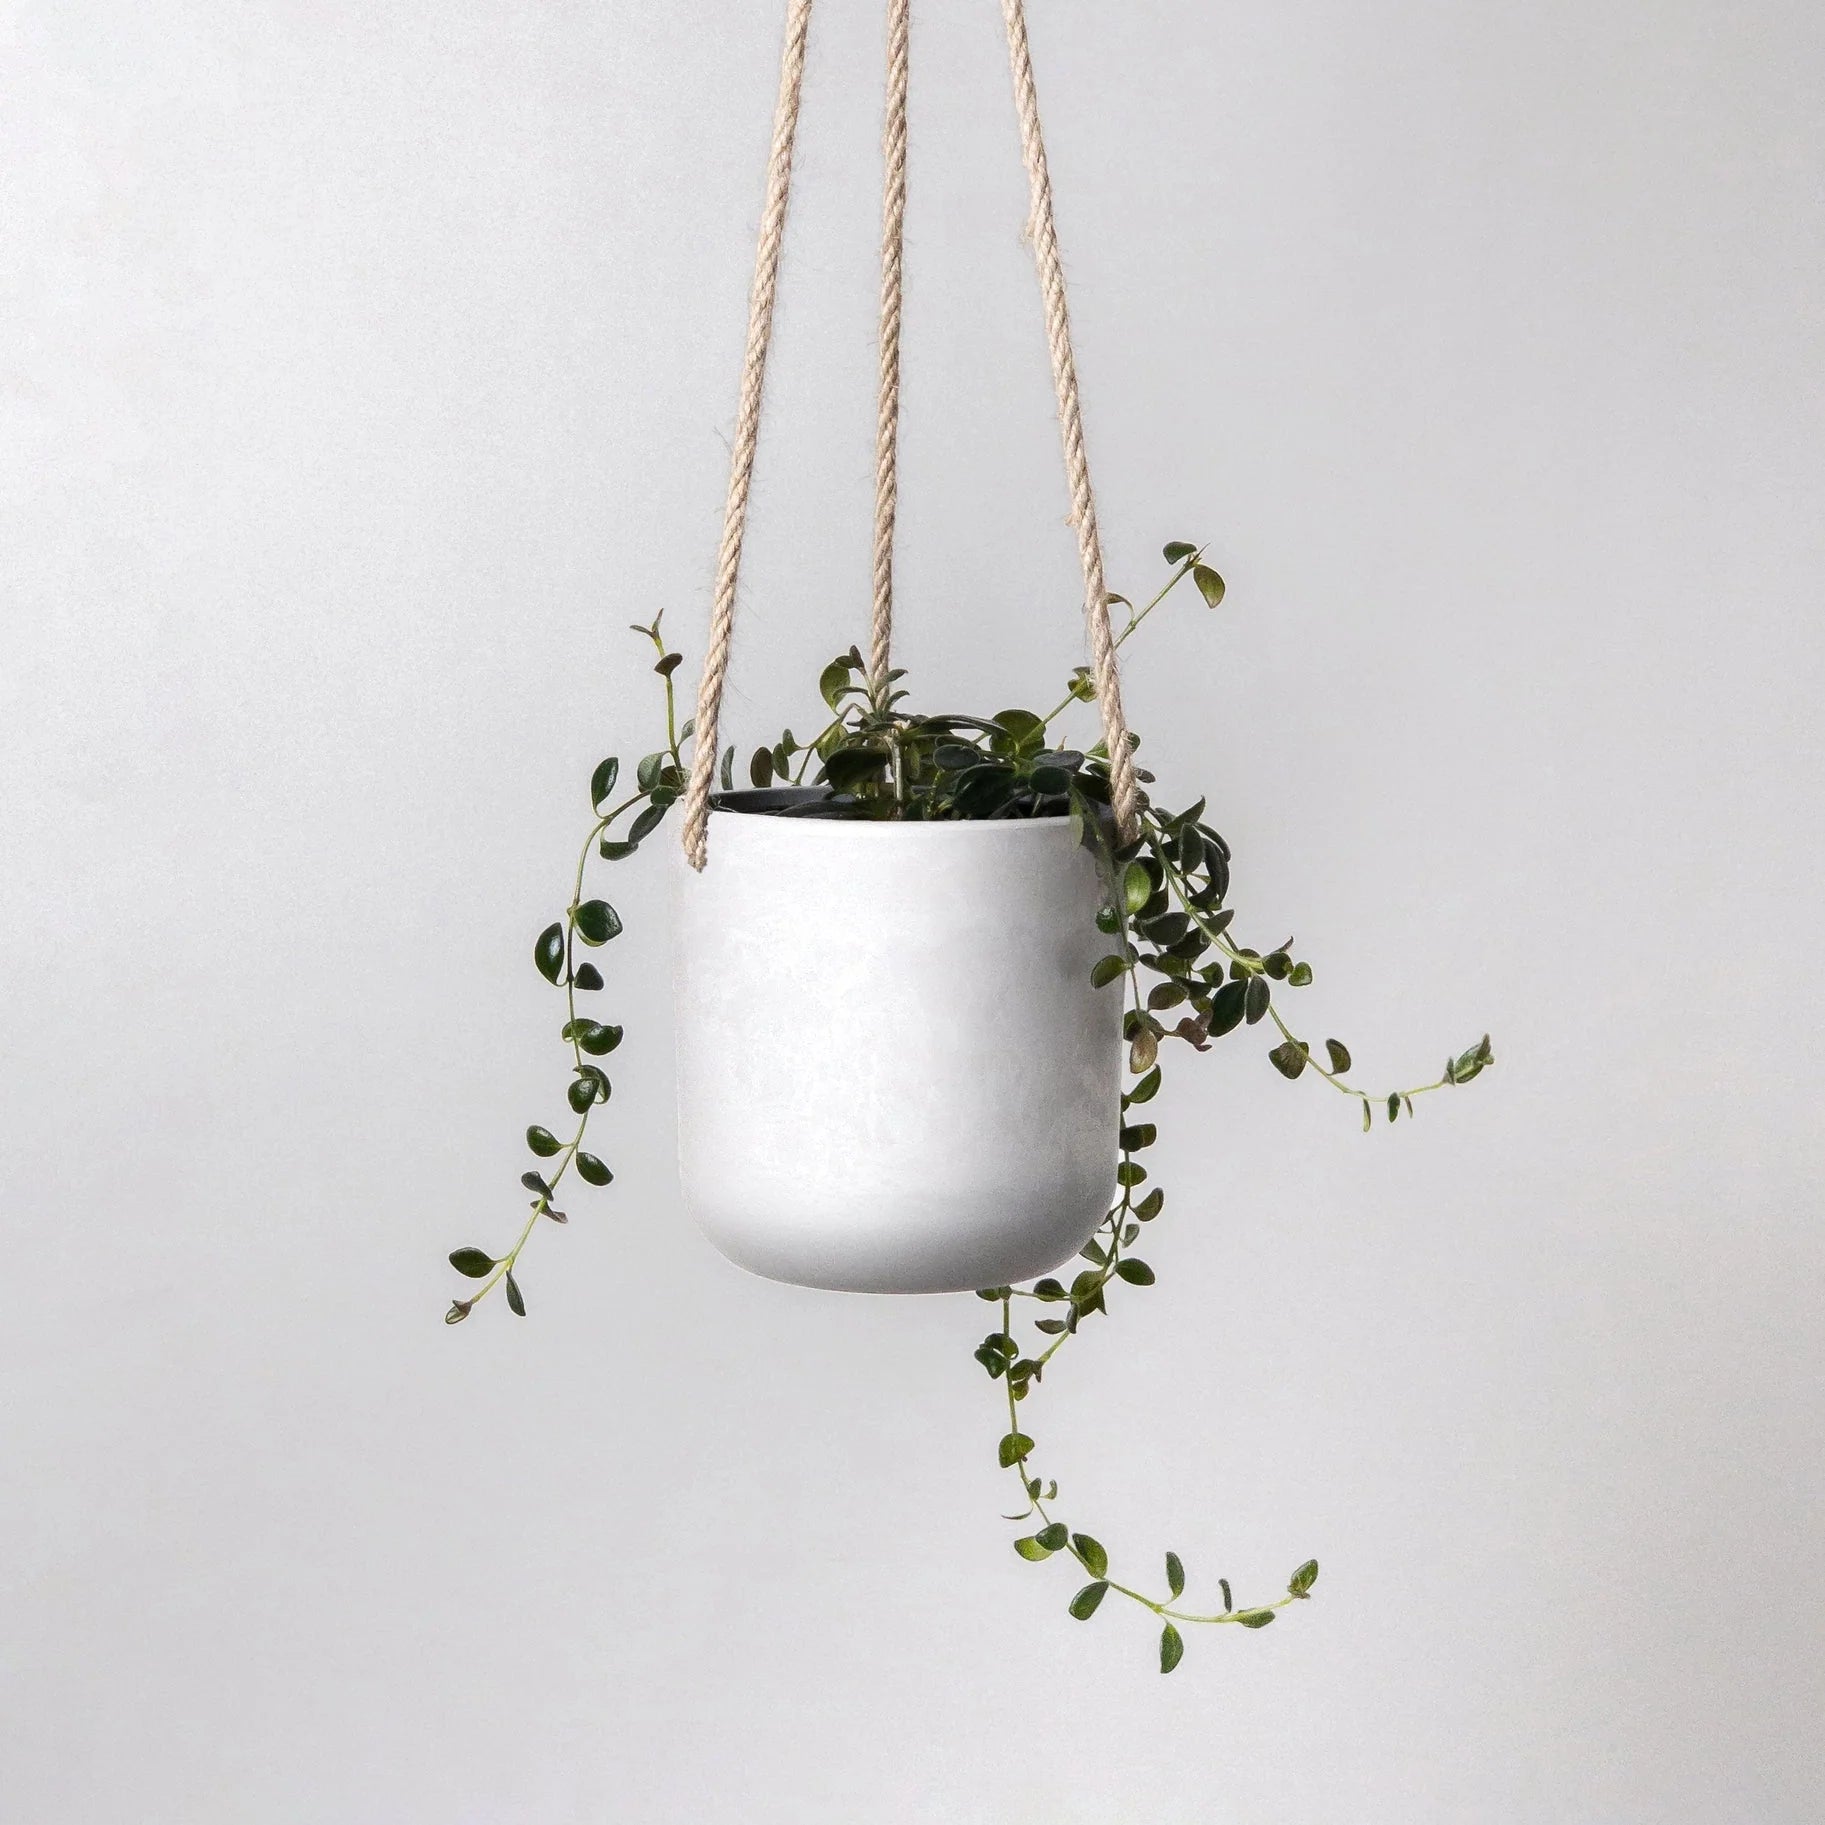 Upcycled Signature Stone Hanging Planter Pot 4"-Pots & Planters-The Succulent Source